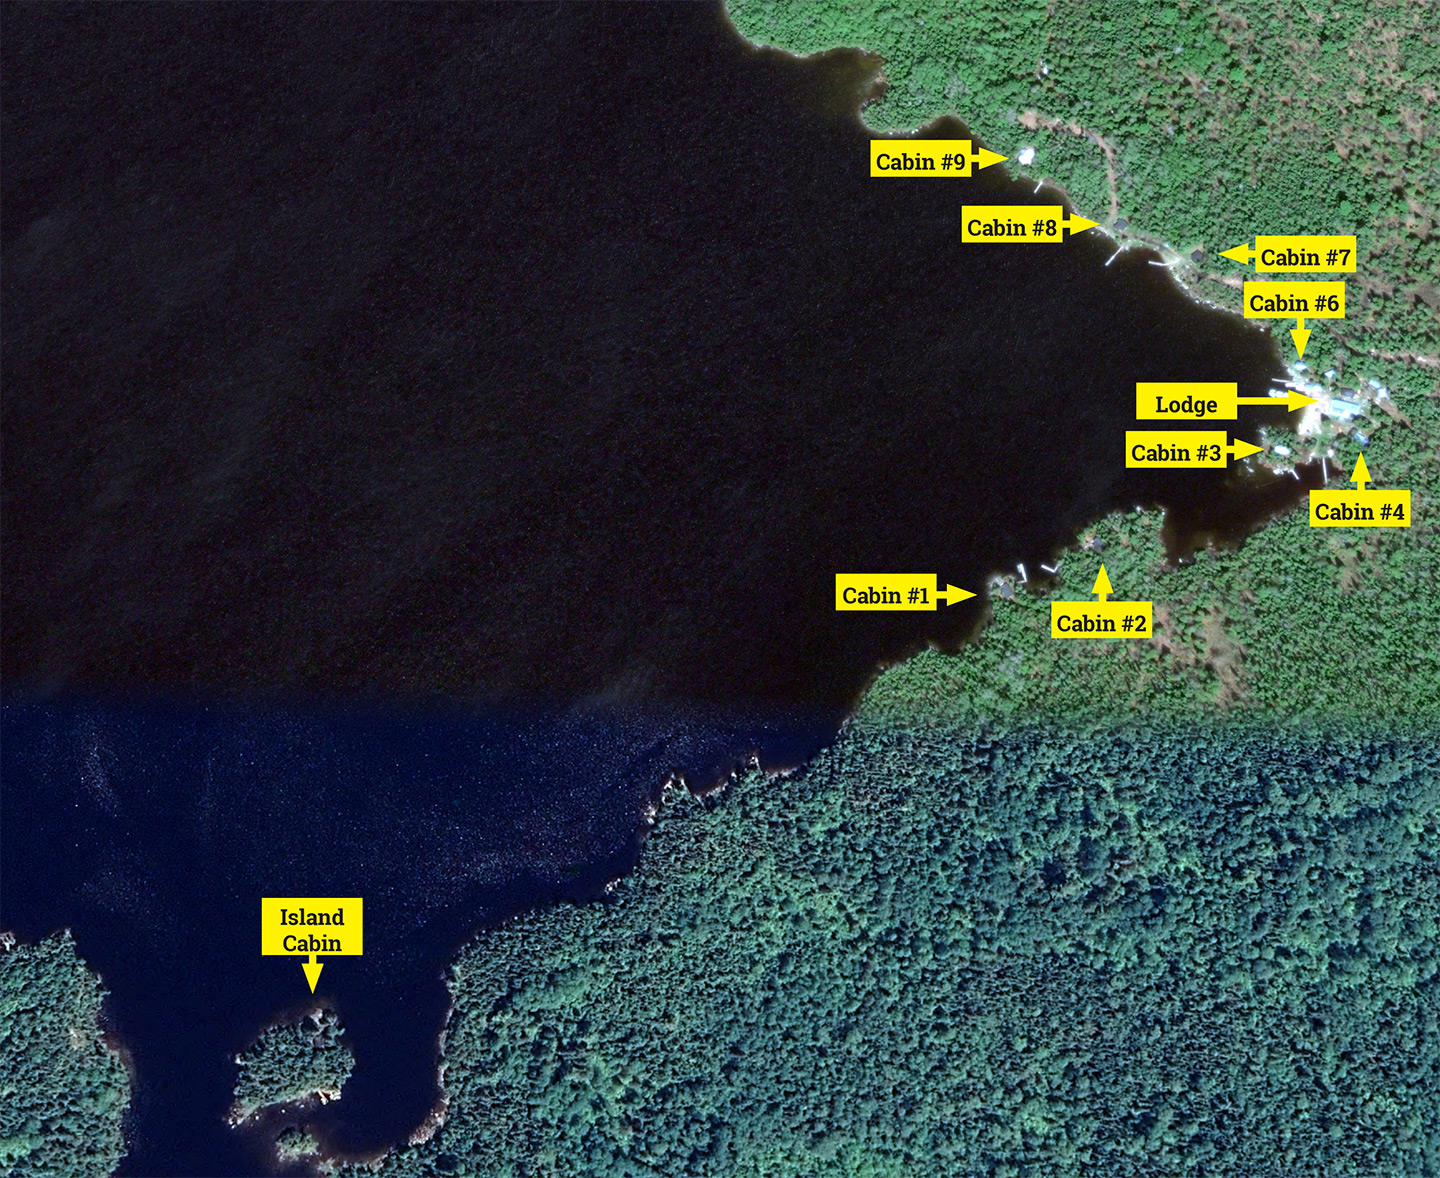 Northern Walleye Lodge Satellite View Of Cabin Locations